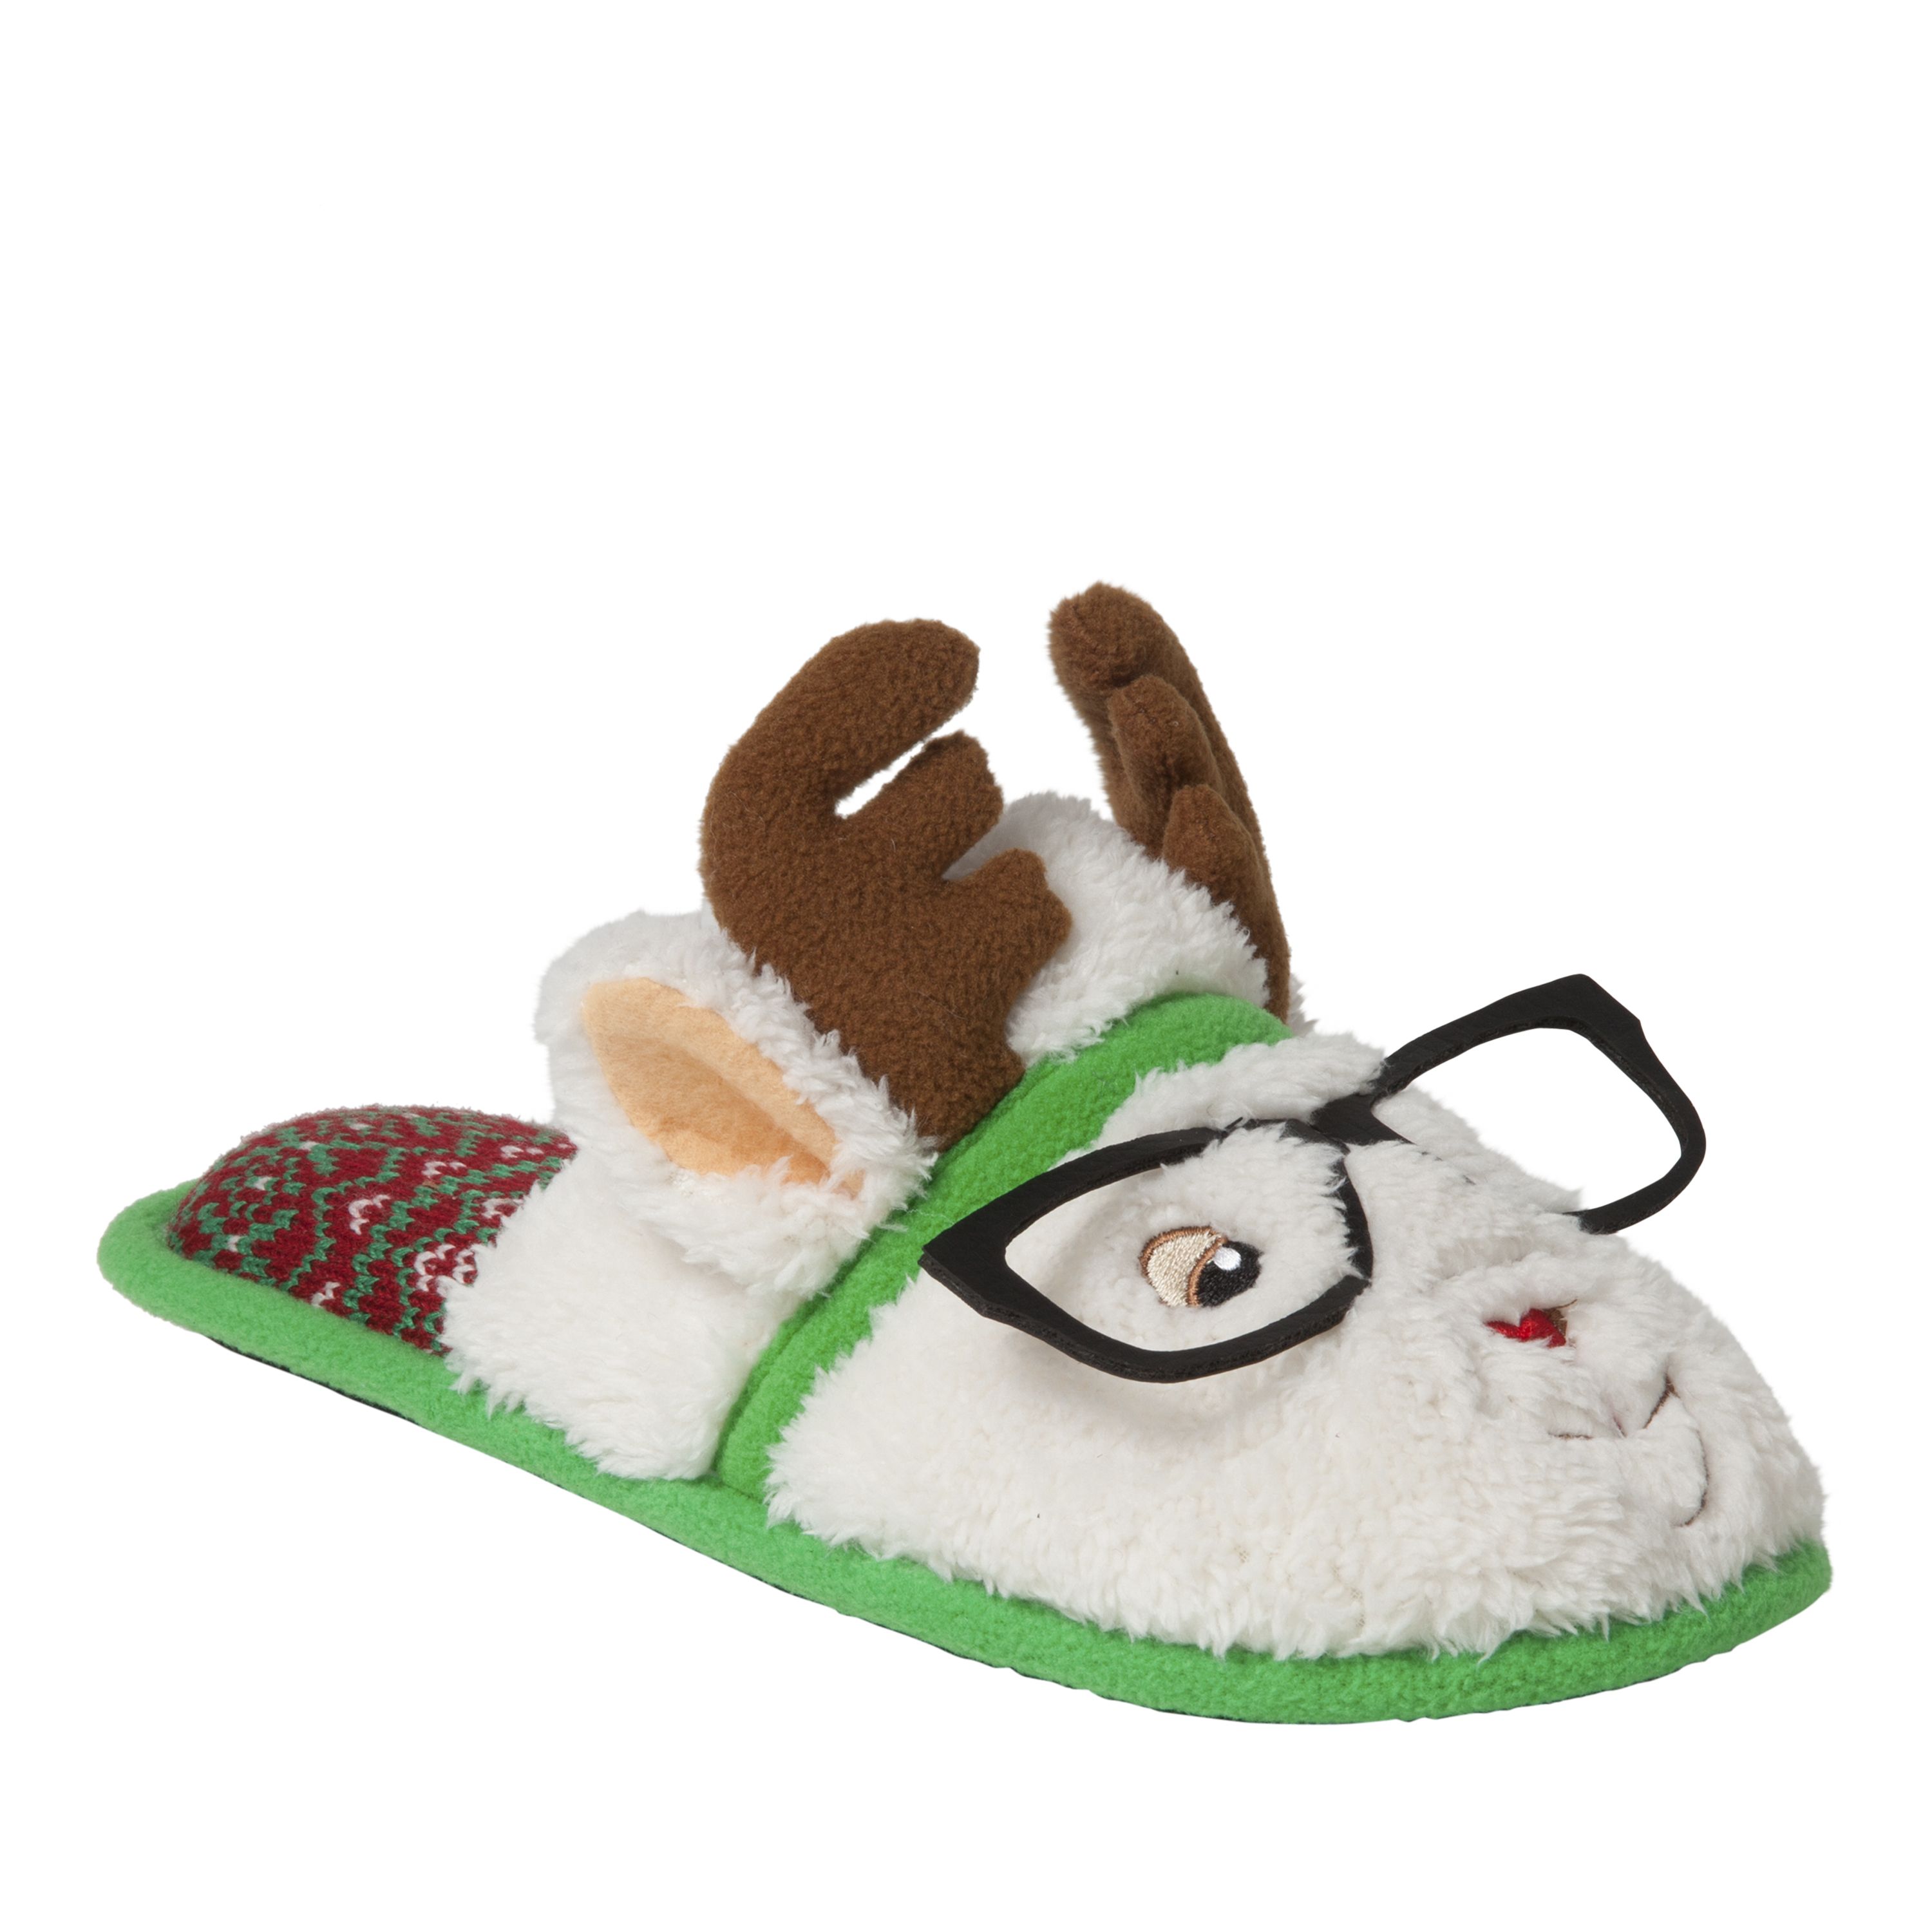 Footwear, Baby & toddler shoe, Slipper, Product, Green, Shoe, Baby Products, Beige, Fur, Fictional character, 